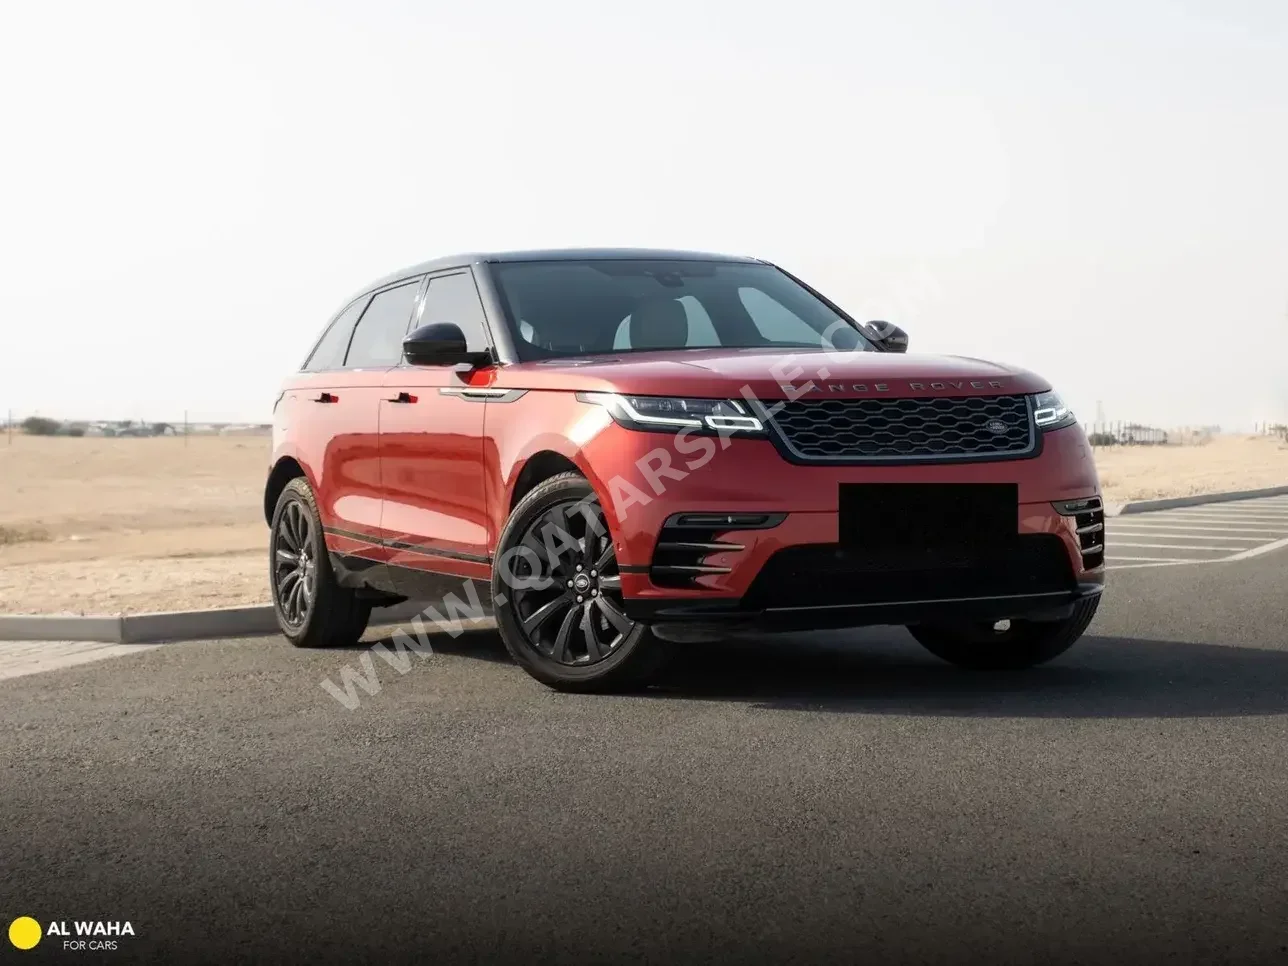 Land Rover  Range Rover  Velar R-Dynamic  2019  Automatic  62,000 Km  4 Cylinder  All Wheel Drive (AWD)  SUV  Red